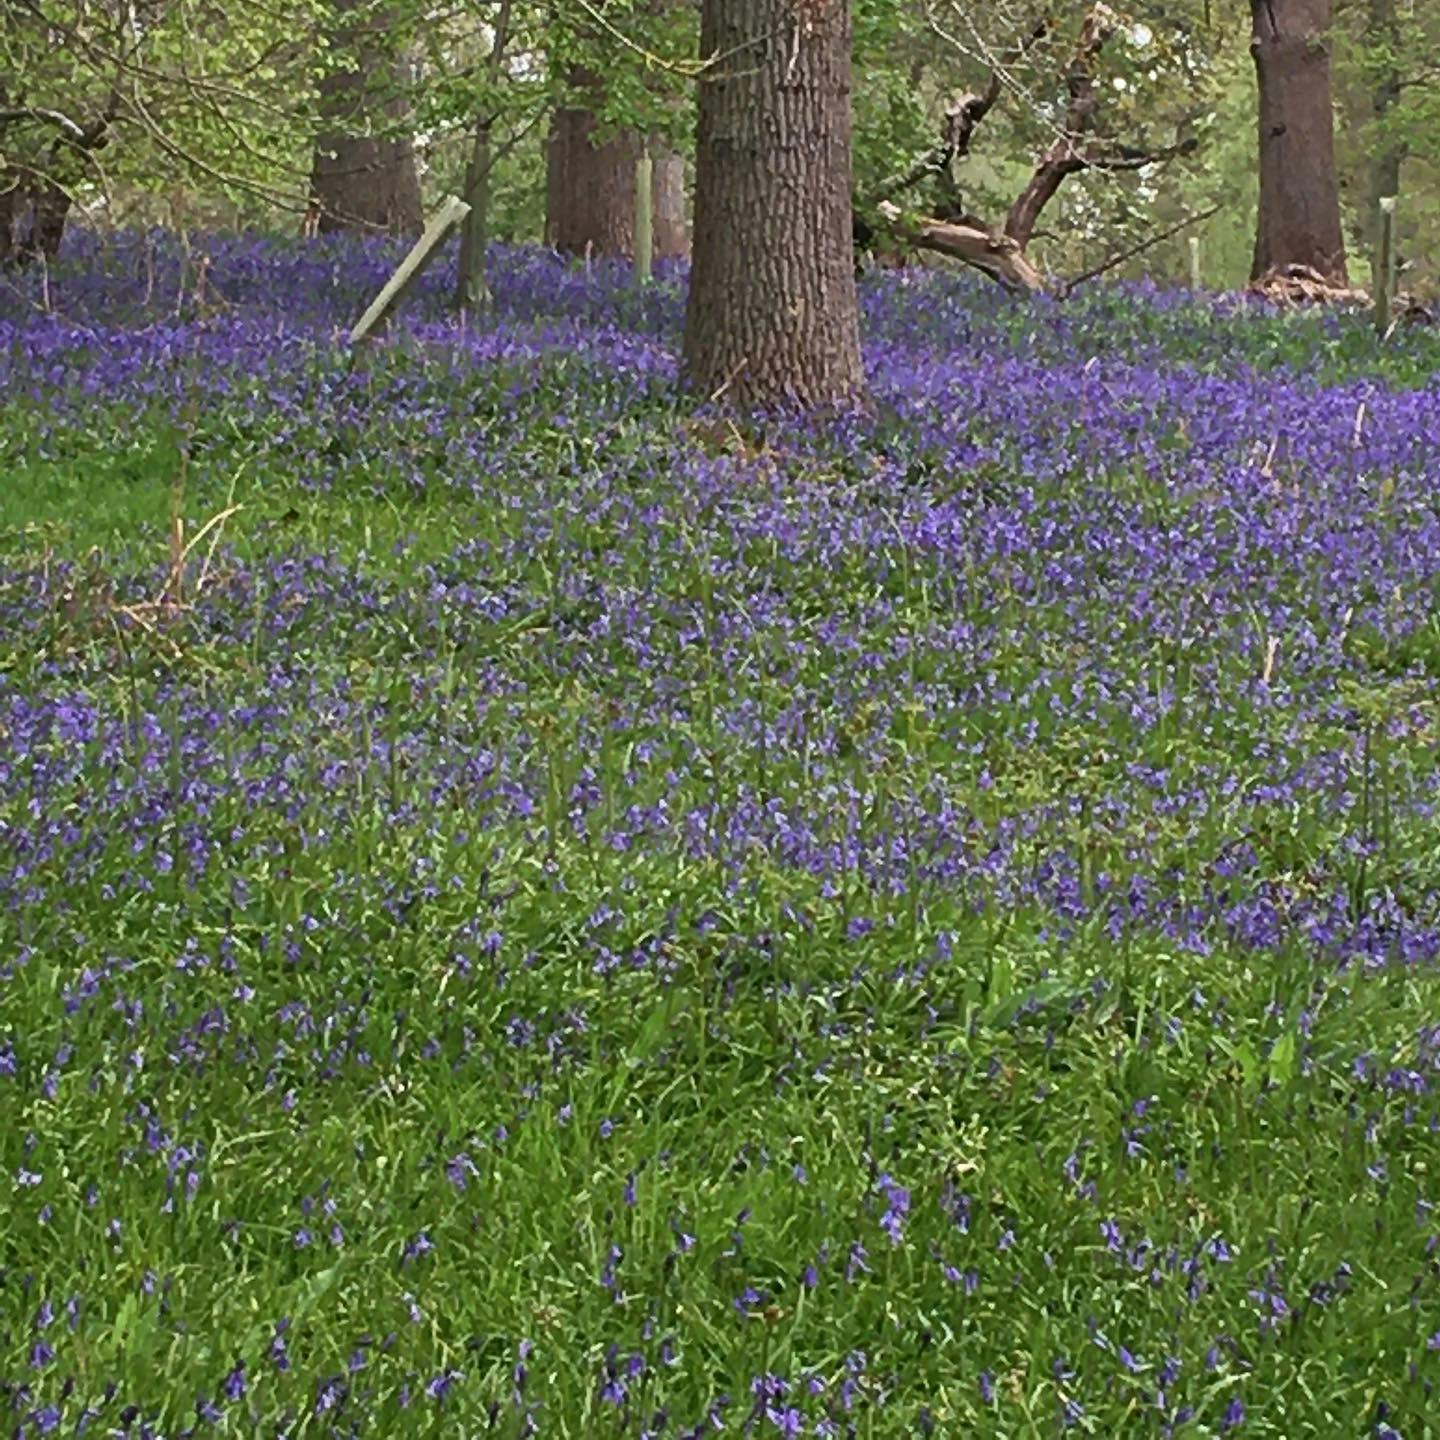 🌿Aaahh...a beautiful carpet of bluebells...

.

🌿It does feel good to get out in nature doesn’t it?

.

🌿 But what about - when you can’t get out to a woodland or large natural space?

.

🌿 Sometimes time or travel restrictions prevent us getting out...

.

🌿 Fear not! 

.

👉🏼 Did you know even having a pot plant on your desk is good for your workplace wellbeing? 

.

👉🏼 Or that just looking out of the window at greenery instead of our screens or mobiles helps us cognitively recharge?

.

👉🏼 So - whatever nature you can clap your eyes on 👀 is gonna be good for you ☺️

.

👉🏼Sam from @easysleepsolutionsuk and I discuss this and more in this weeks Thrive Pod - the podcast on IGTV - check it out on my account! 

.

👉🏼 And visit workingwelldoctor.com to join the Thrive Well email community where I discuss themes like this each week! 

.

👉🏼 link in bio

.

👉🏼 I’d love to hear your thoughts in the comments 👇🏼☺️

.

#nature #thrive #wellbeing #naturewalk #lifestylemedicine #bluebells #bluebellwoods